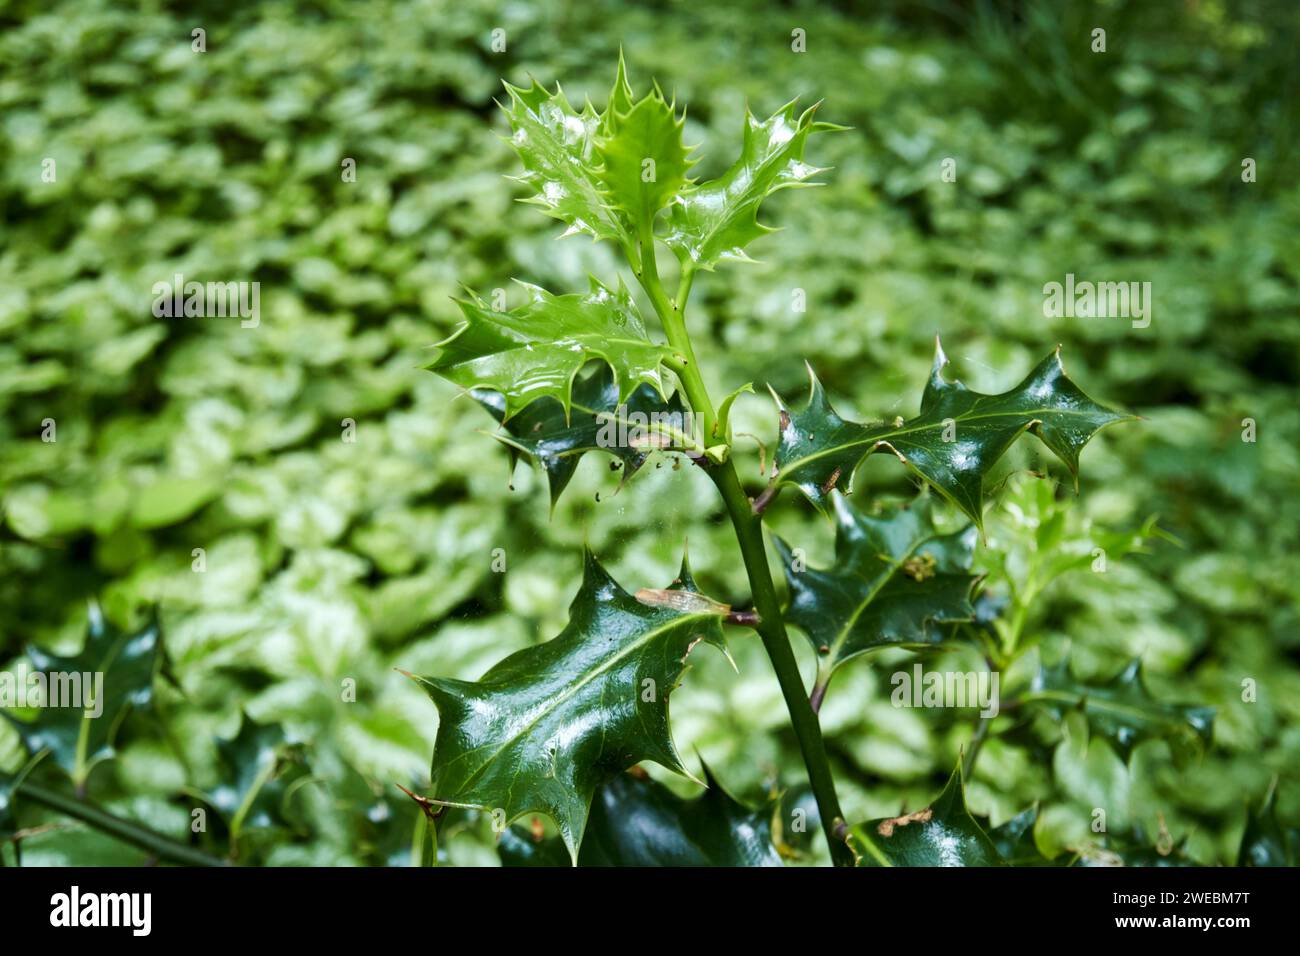 new holly leaves and shoots on a plant in woodland england uk Stock Photo